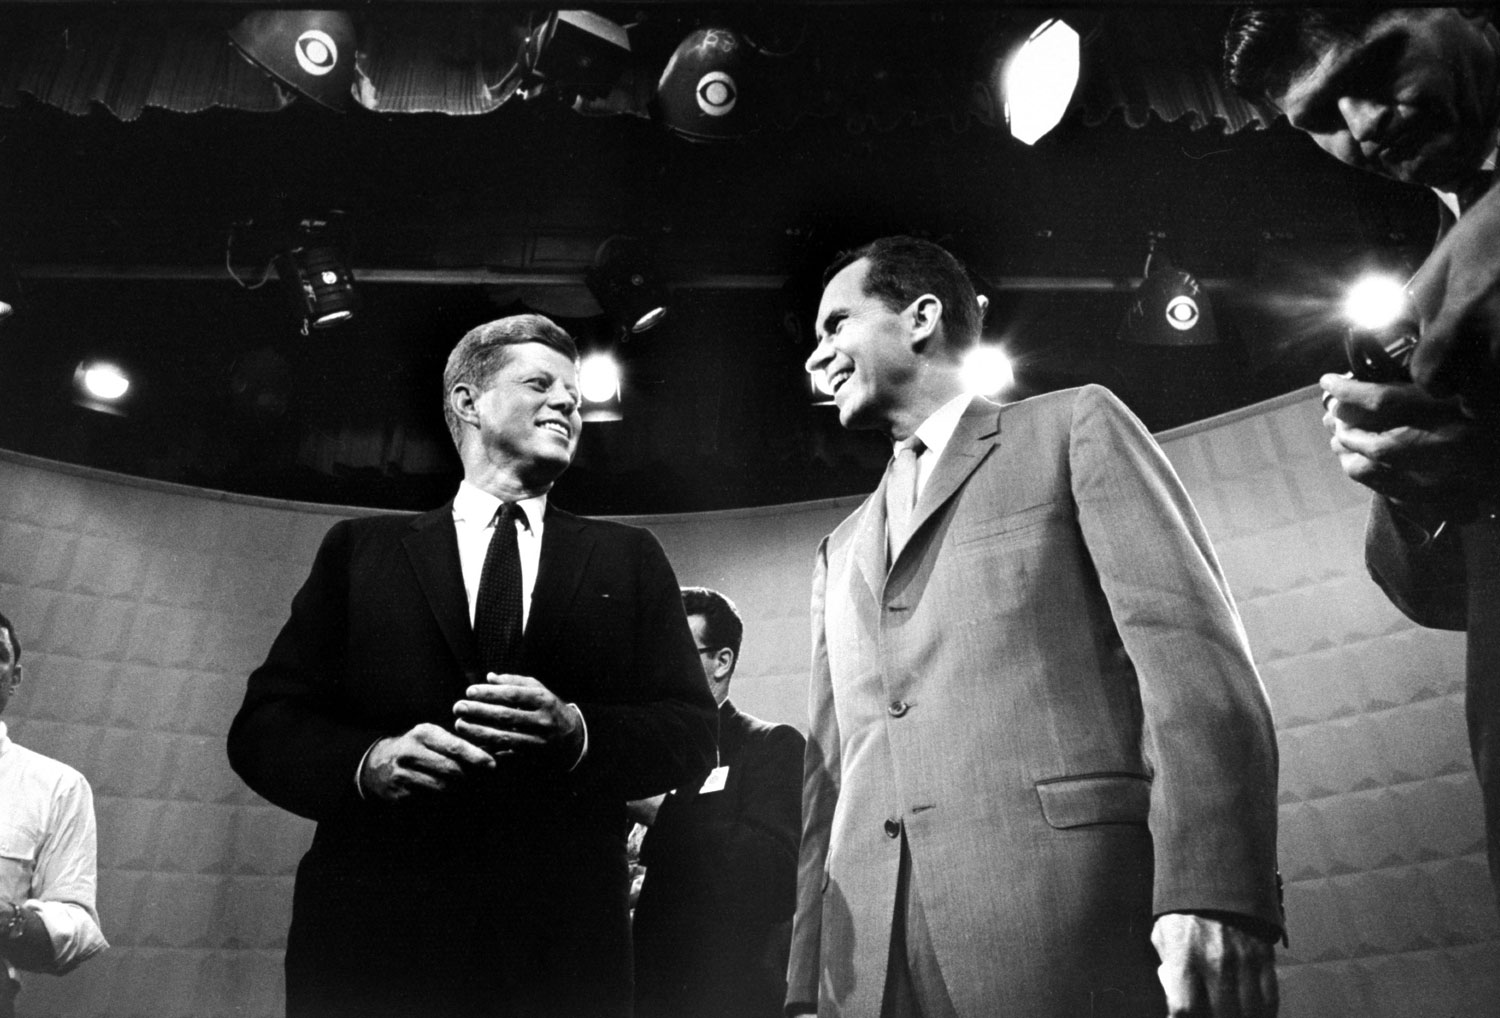 Photo made prior to the first Kennedy-Nixon debate, 1960.